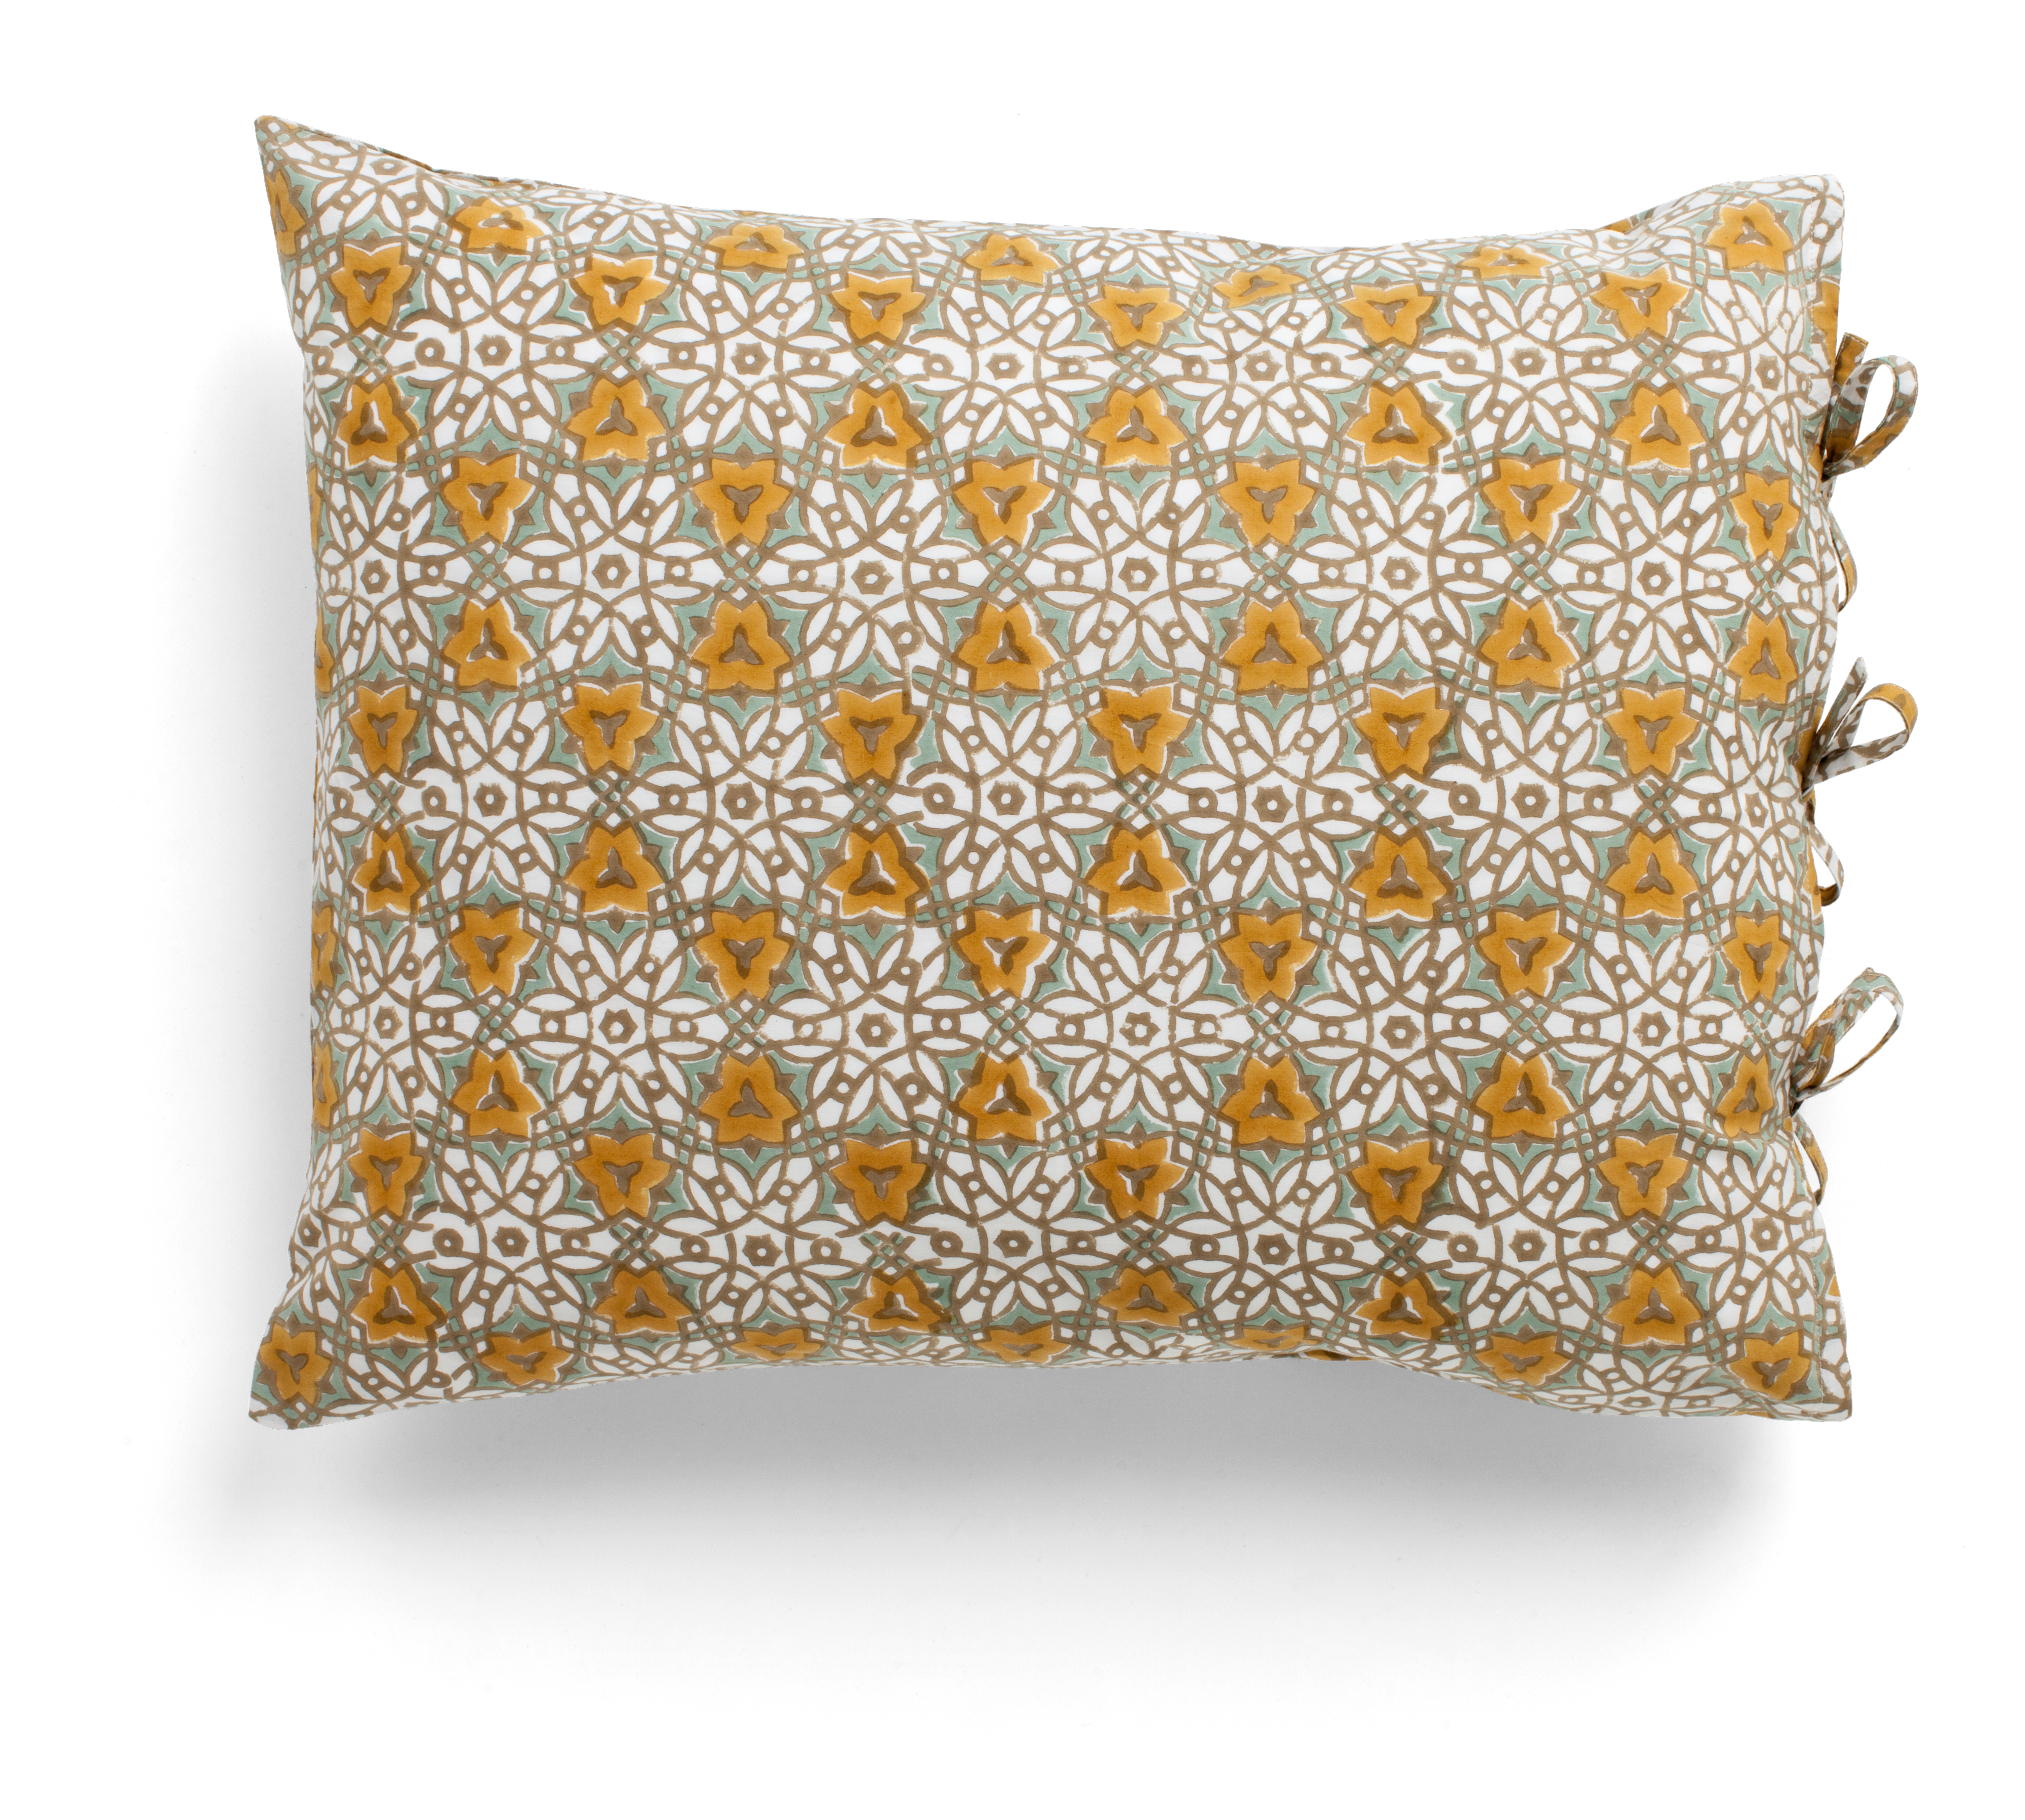 Pillowcase with City Palace print in Ochre